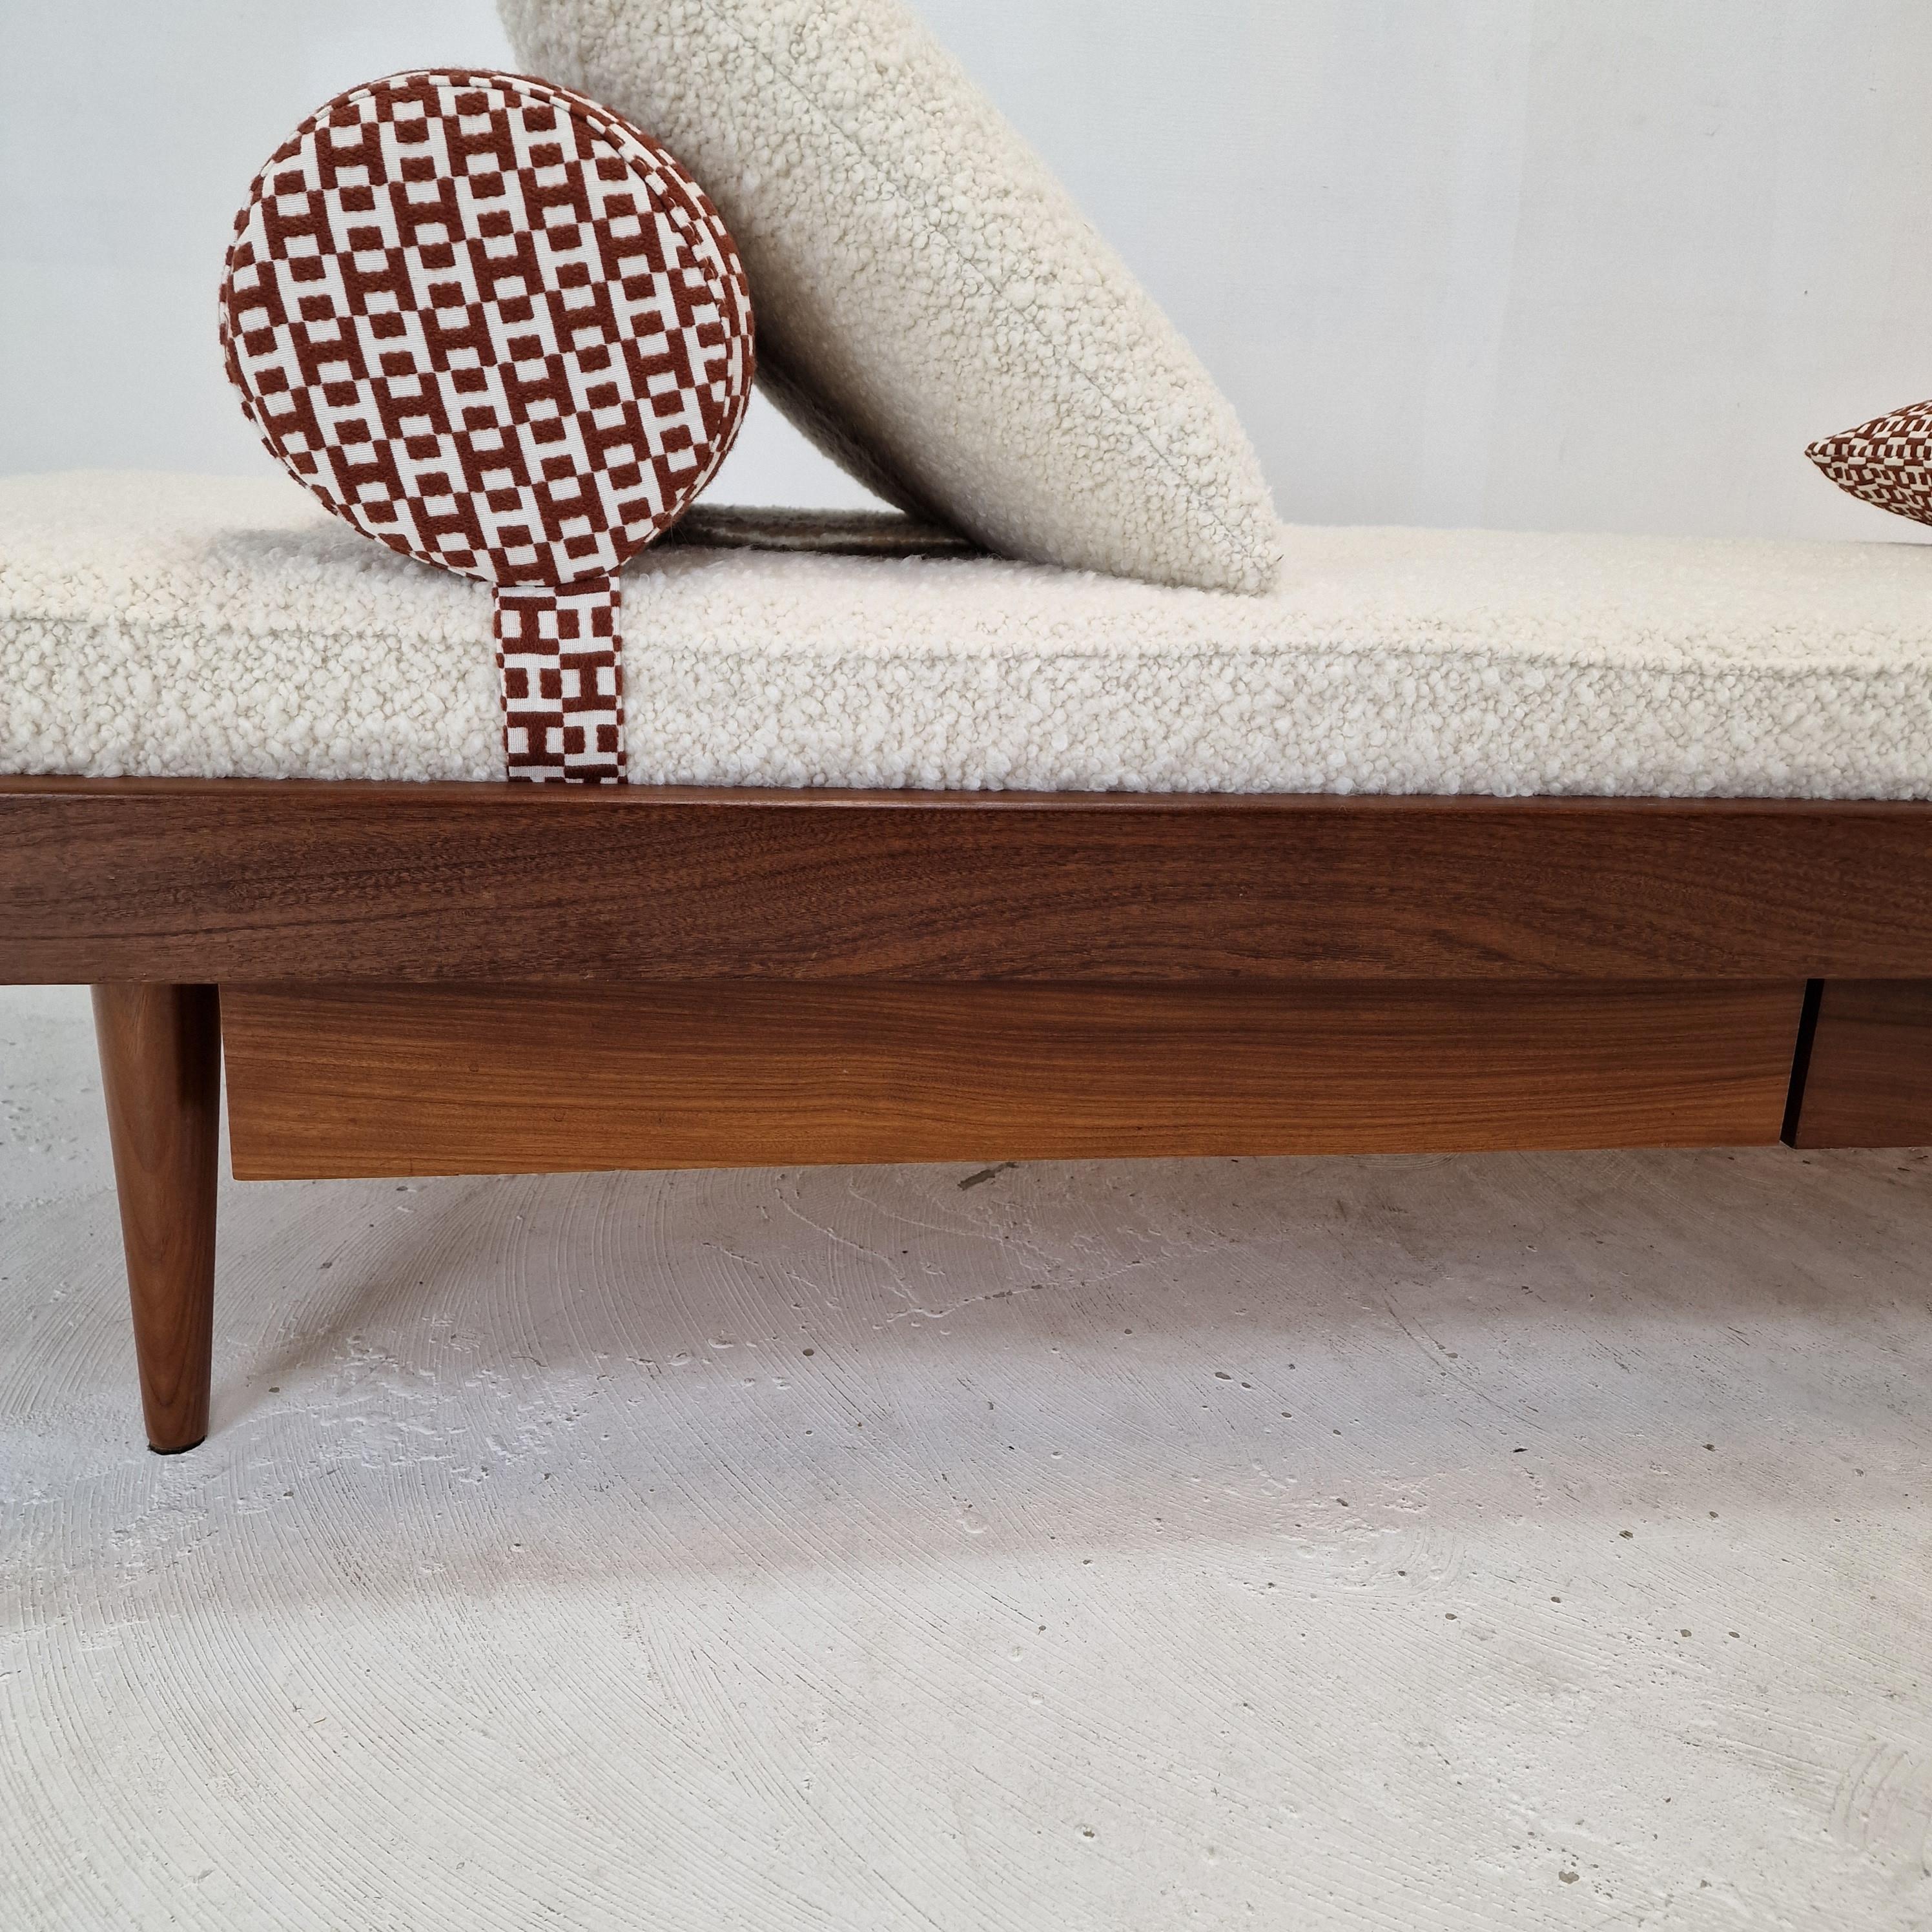 Teak Daybed with Hermes Cushions and Bolster, 1960s For Sale 6